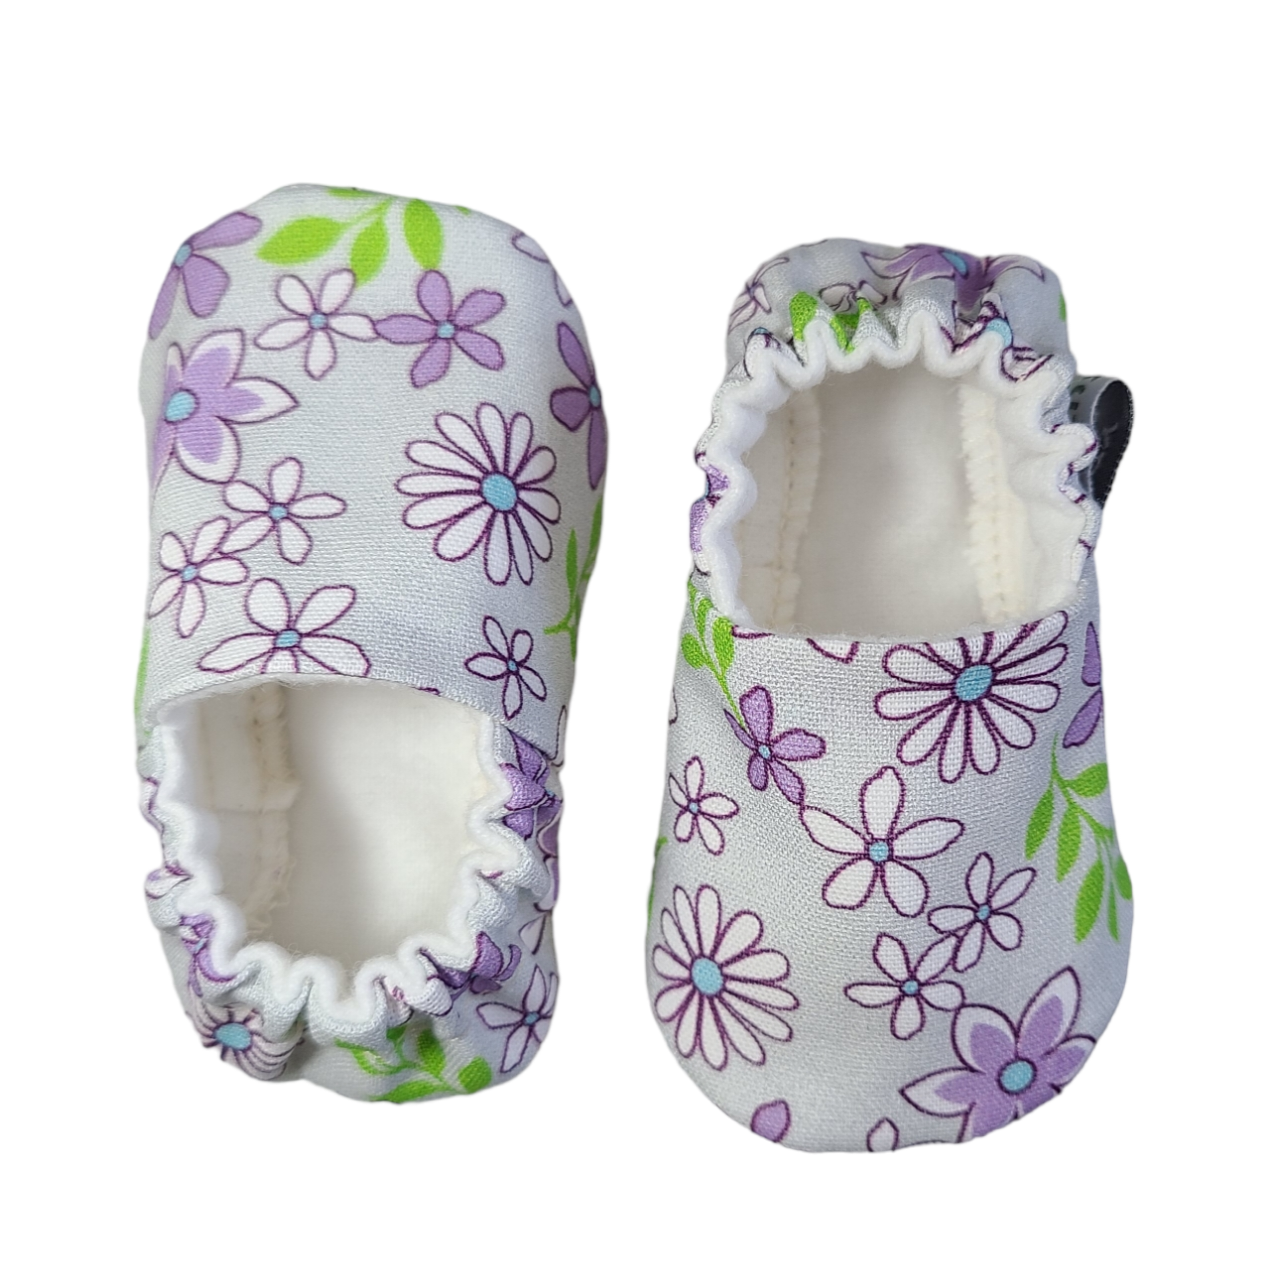 Floral Baby Shoes, Floral Crib Shoes, Floral Baby Moccs, Floral Baby Slippers, Flowered Baby Slippers, Baby Girl Shoes